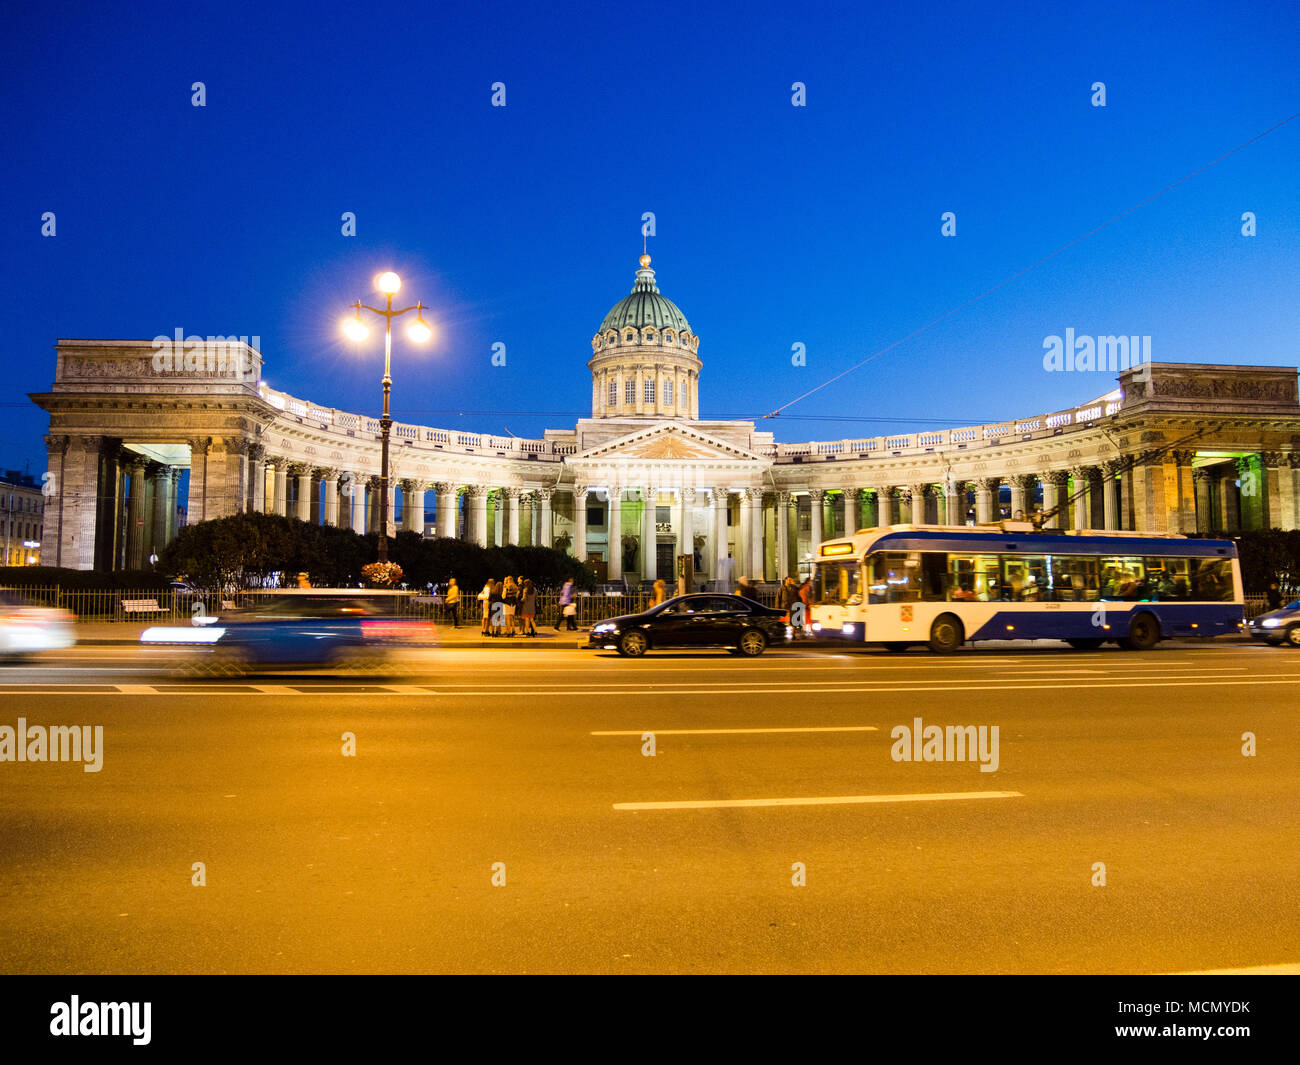 St. Petersburg, Russia: Cathedral of Our Lady of Kazan, Nevsky Prospekt Stock Photo